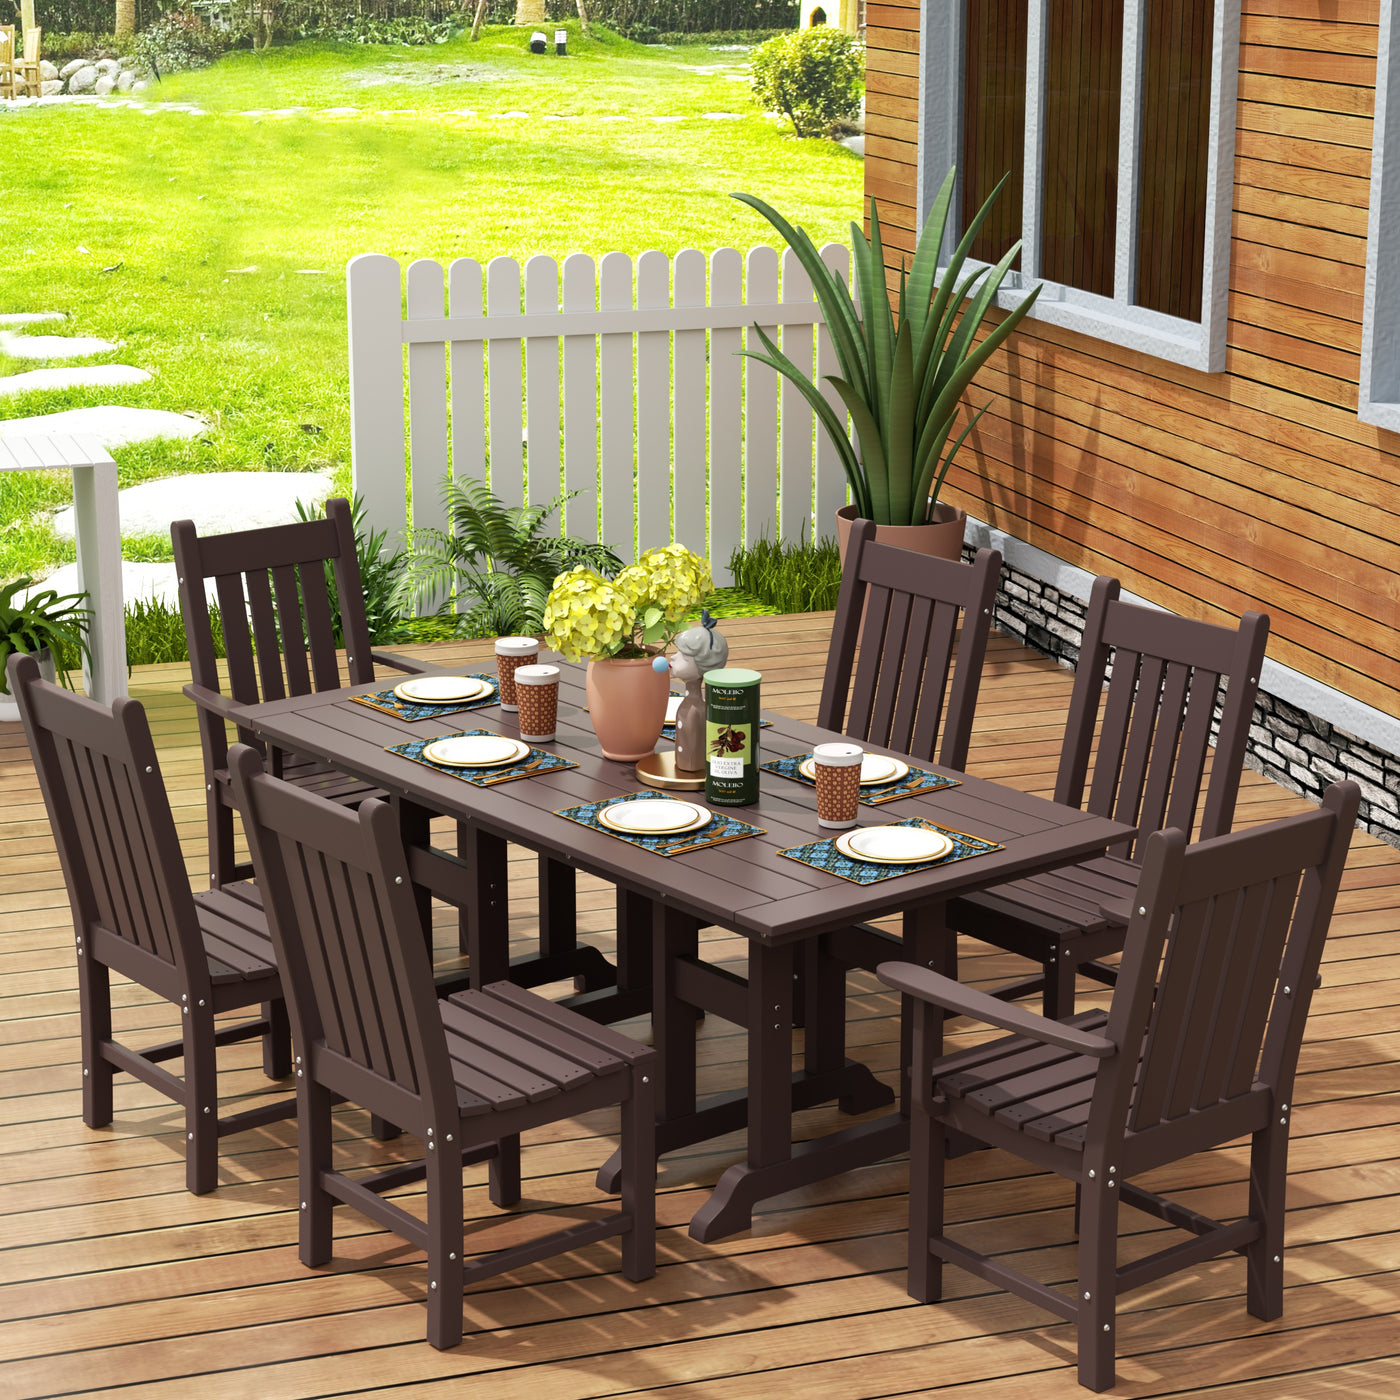 Malibu 7 Piece Outdoor Patio Dining Set Outdoor Dining Table with Dining Chair